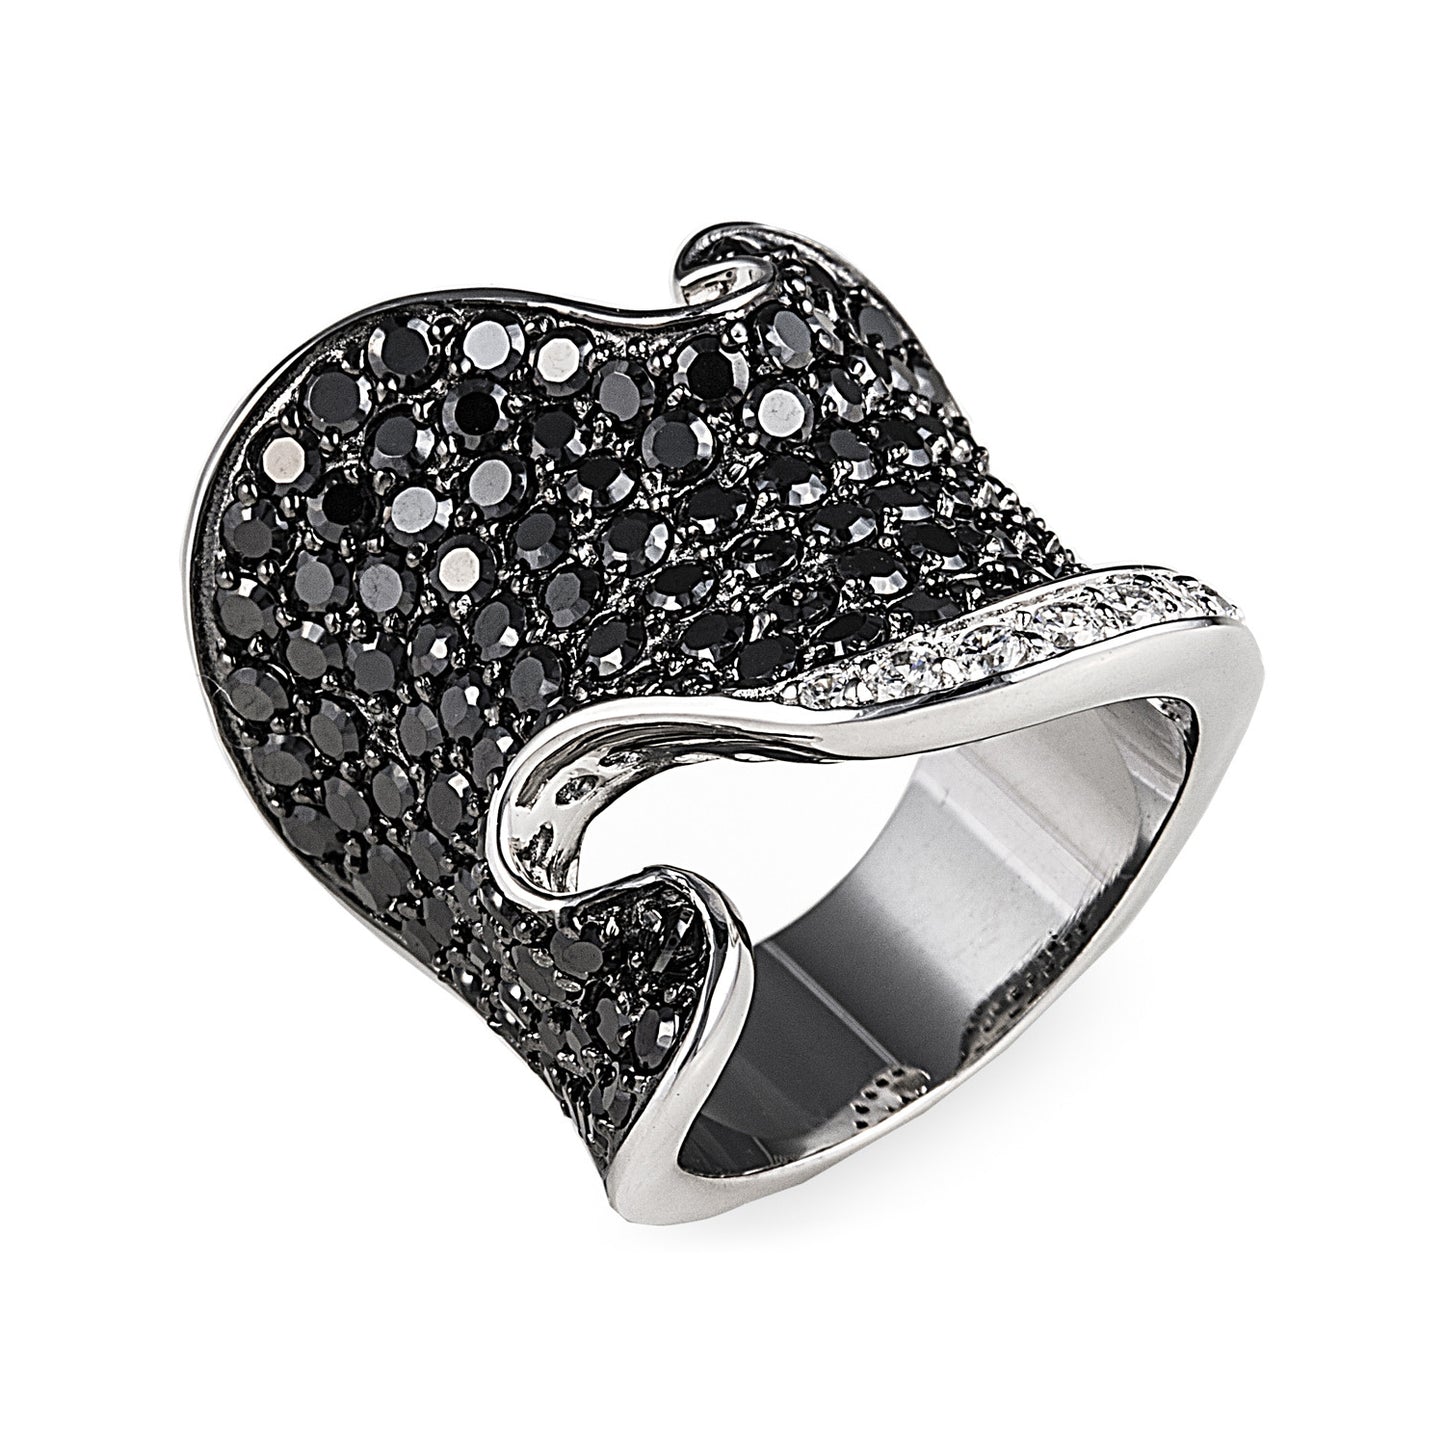 Florida Ring in 925 sterling silver with black and clear cubic zirconia stones. Worldwide shipping from Australia. Shop jewellery online Bellagio & Co.